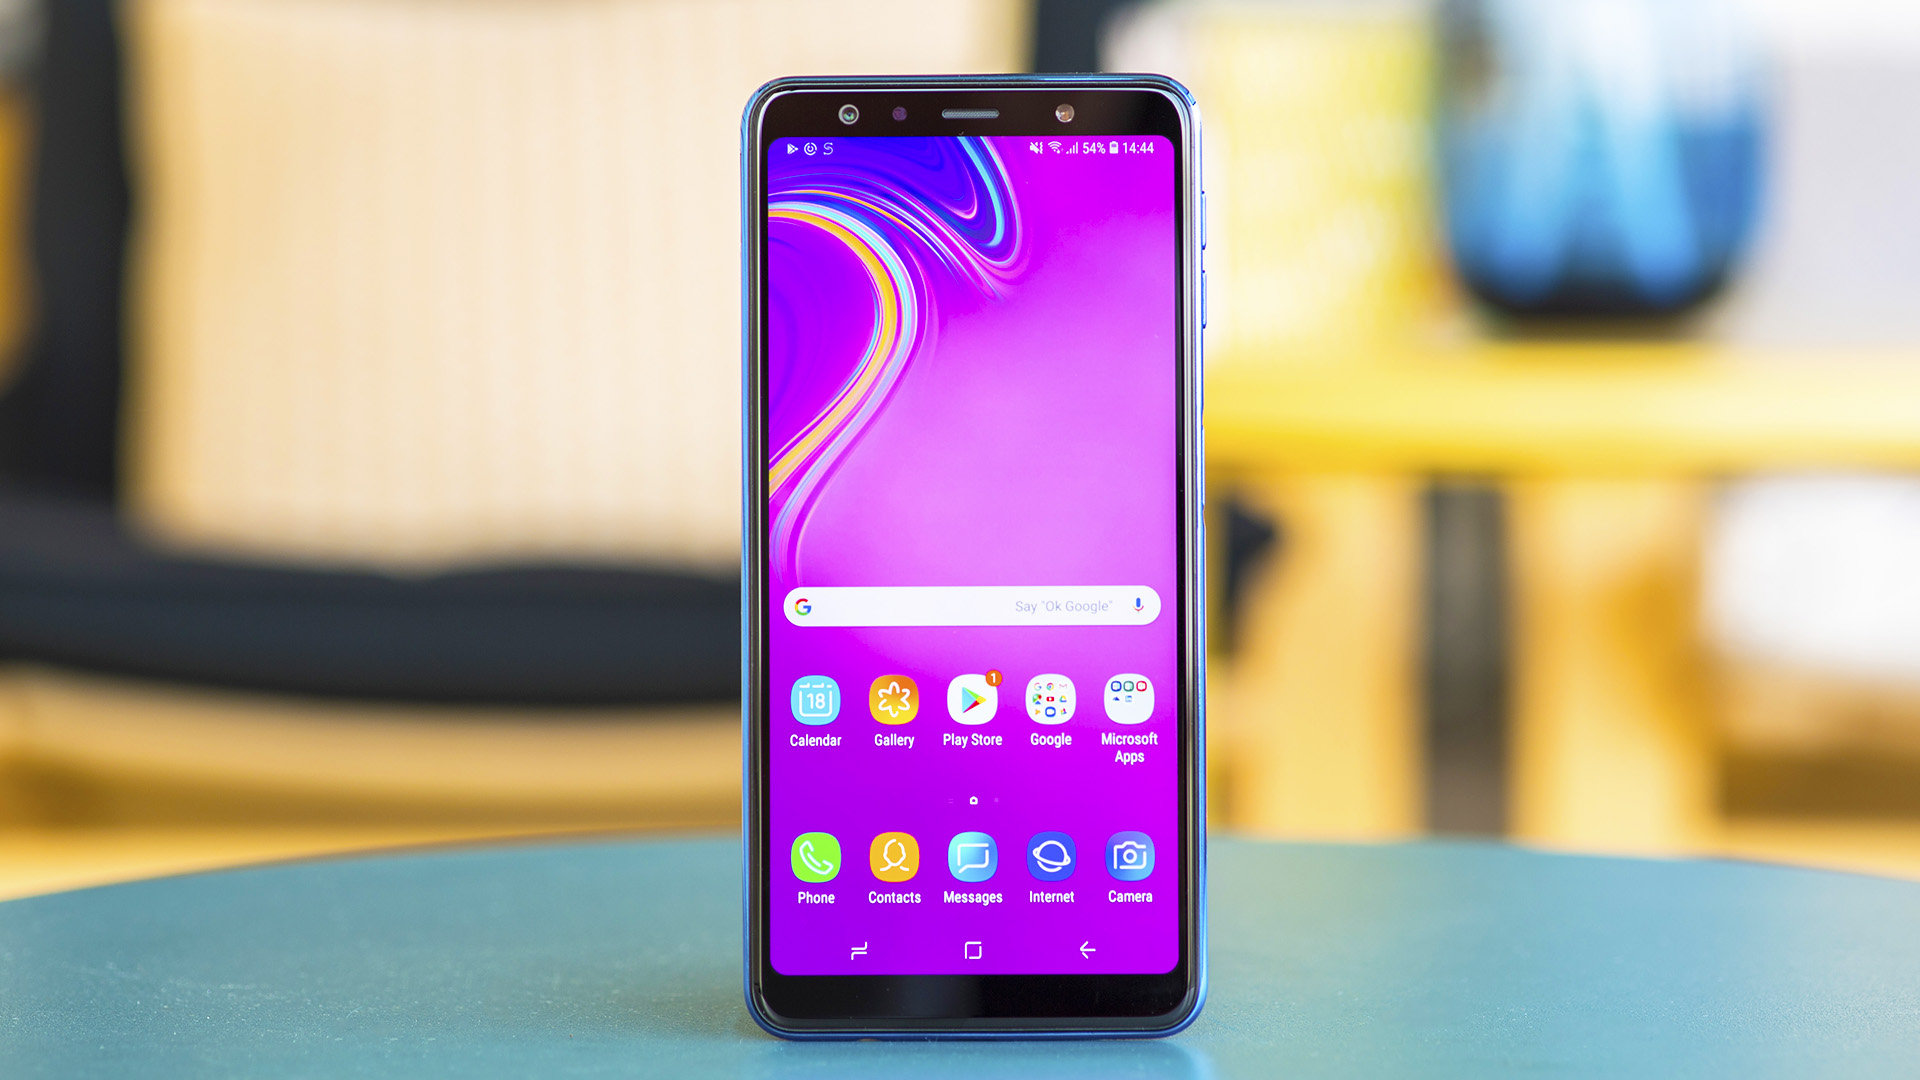 Samsung Android 10 update is rolling out for more than 3 smartphones